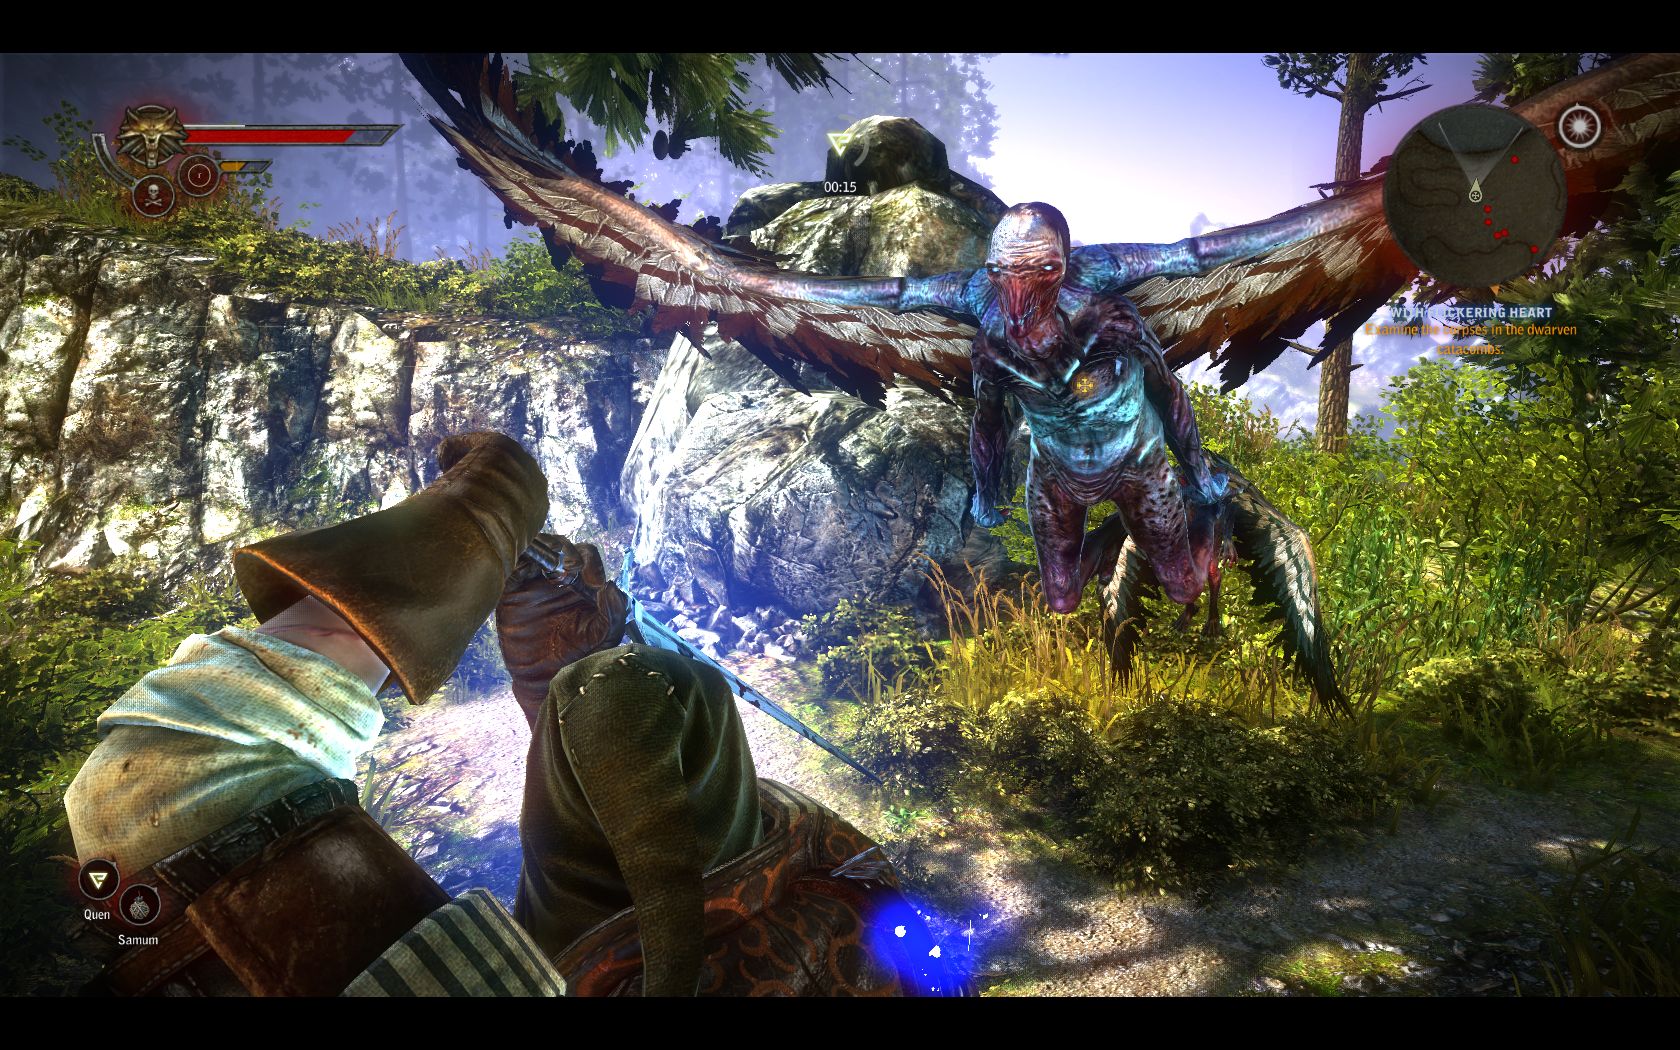 The Witcher 2: Assassins of Kings Enhanced Edition - Gameplay